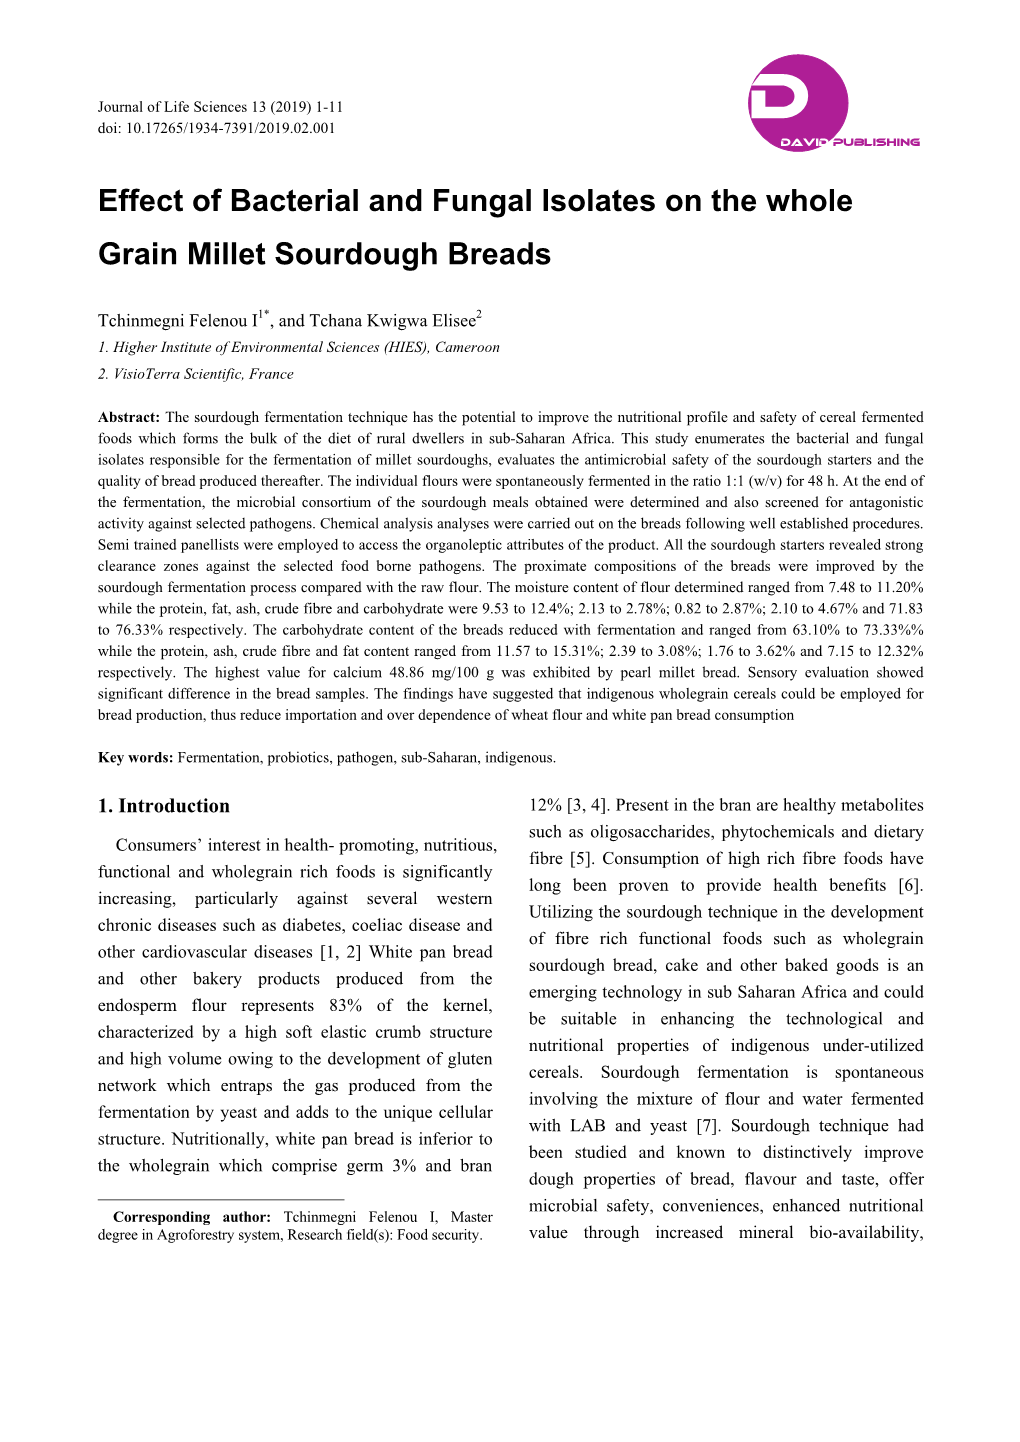 Effect of Bacterial and Fungal Isolates on the Whole Grain Millet Sourdough Breads